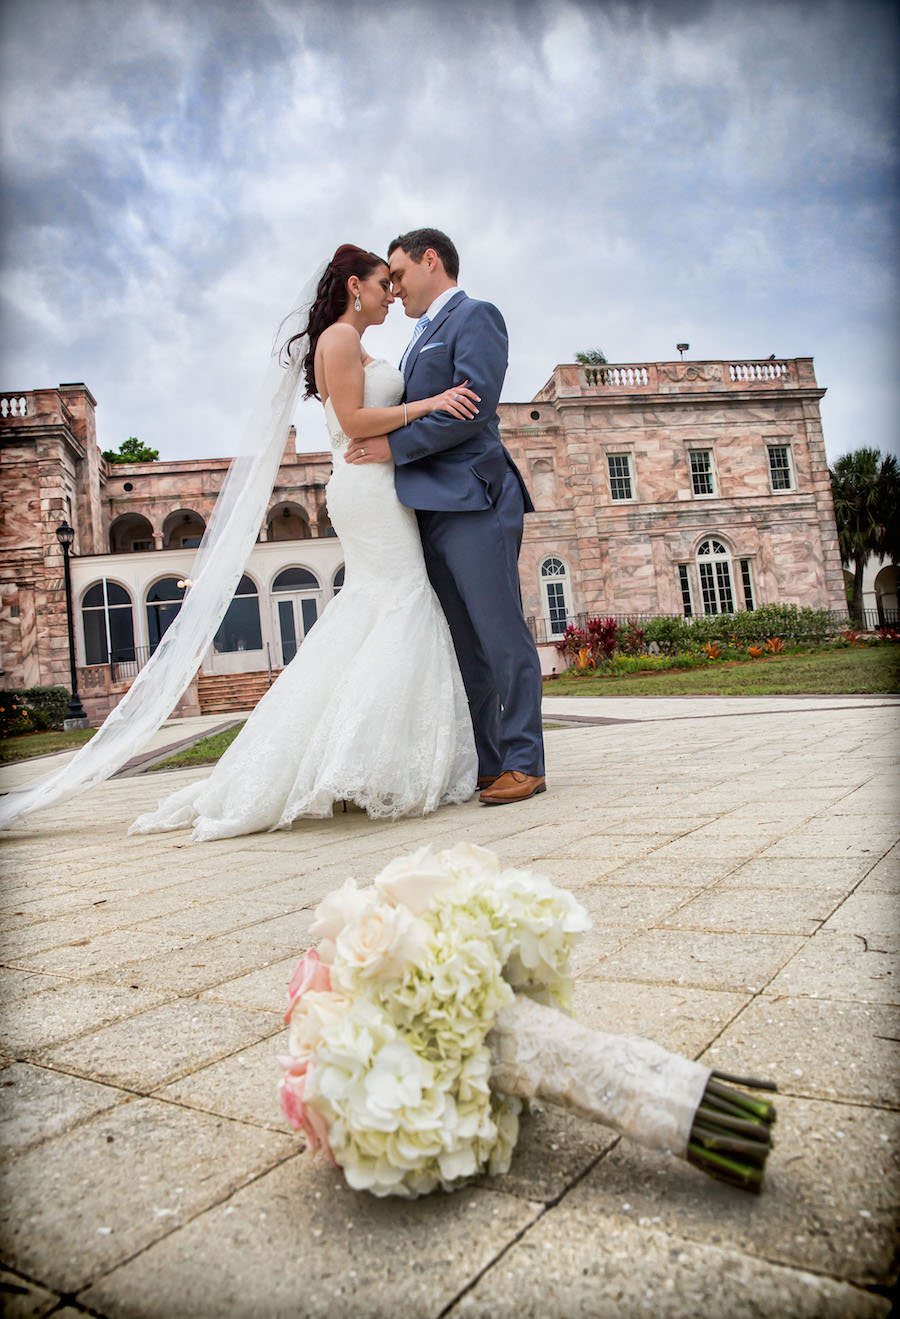 Outdoor, Florida Bride and Groom Wedding Portrait at Sarasota Wedding Venue Ca’ d’Zan Mansion at The Ringling Museum